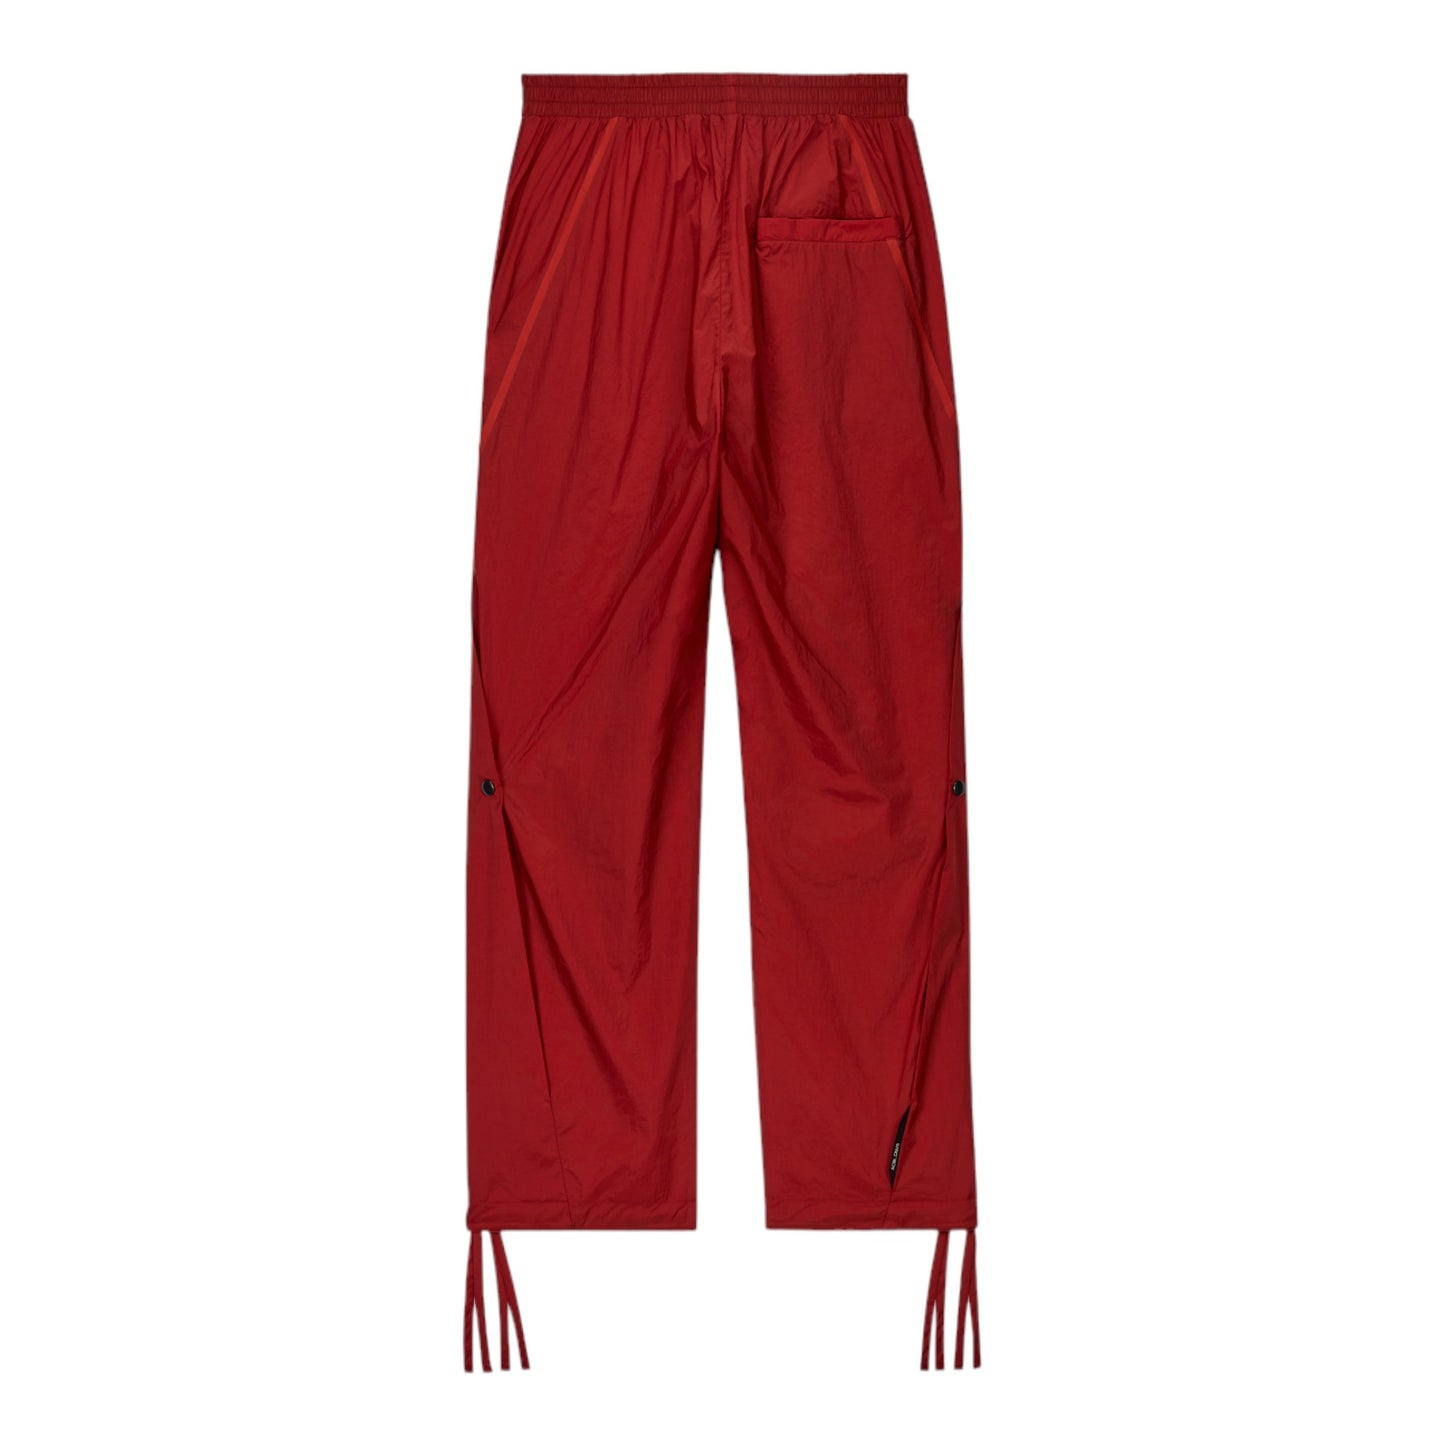 CONVERSE x A-COLD-WALL REVERSIBLE GALE PANT